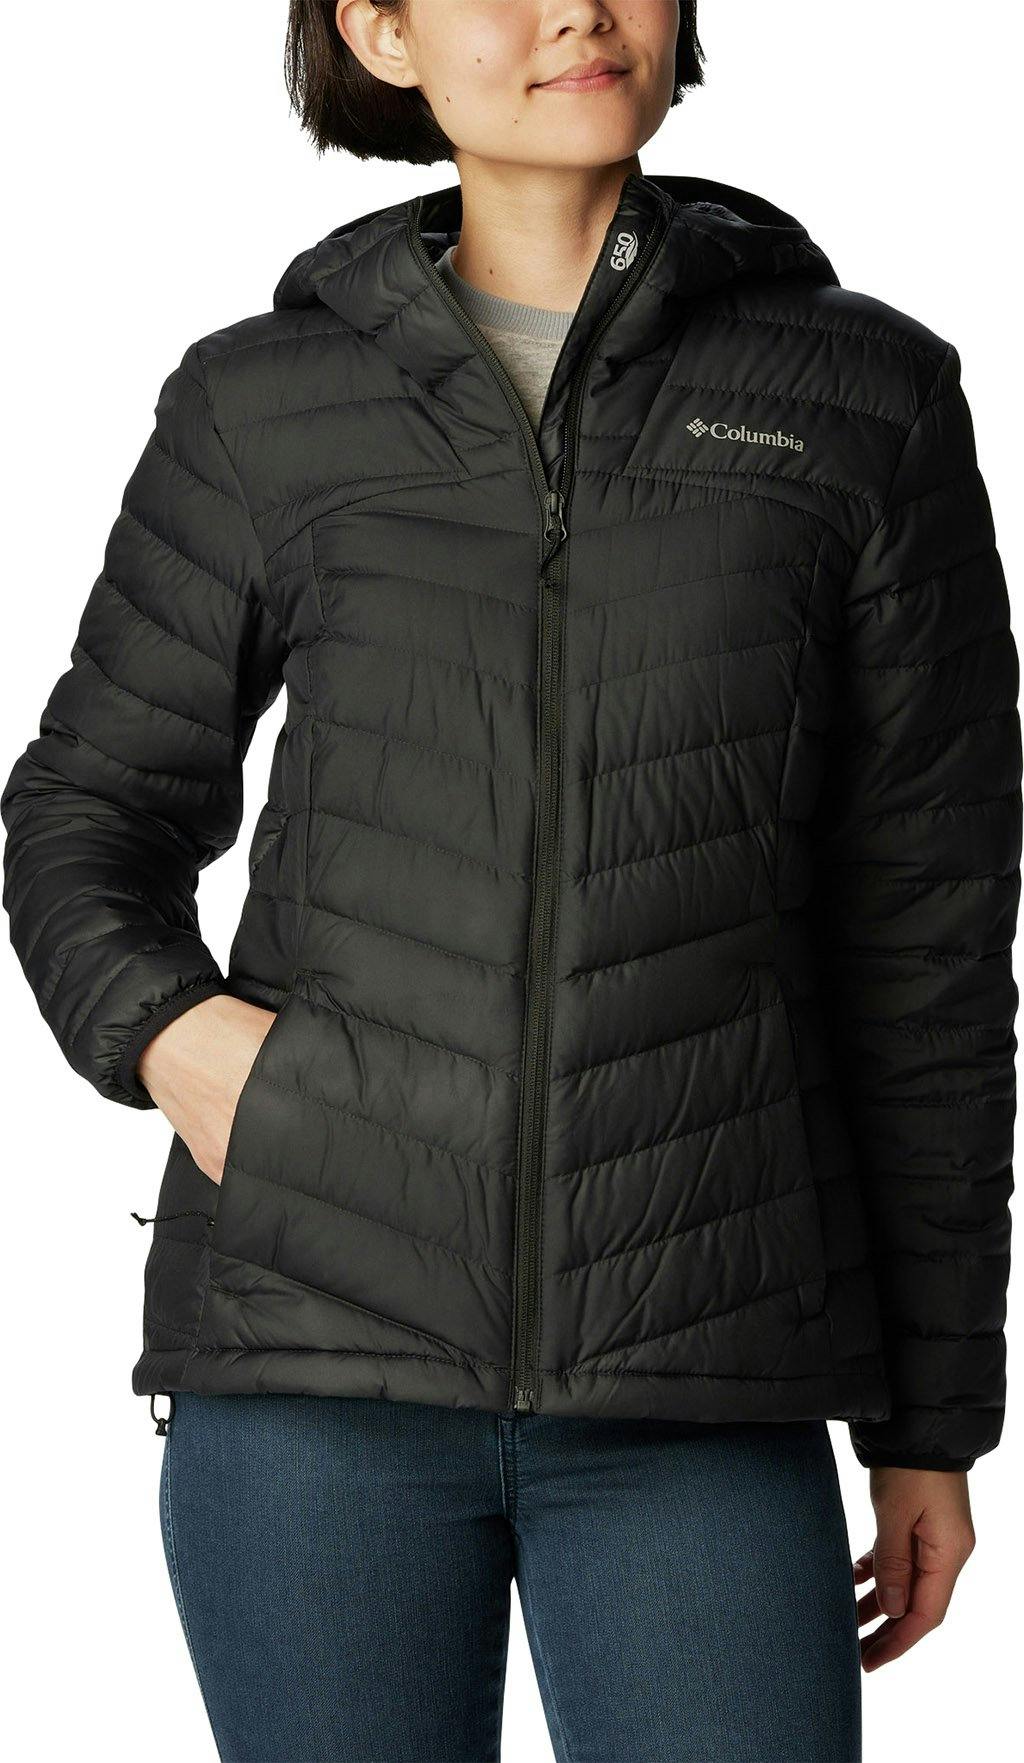 Product image for Westridge Hooded Down Jacket - Women's